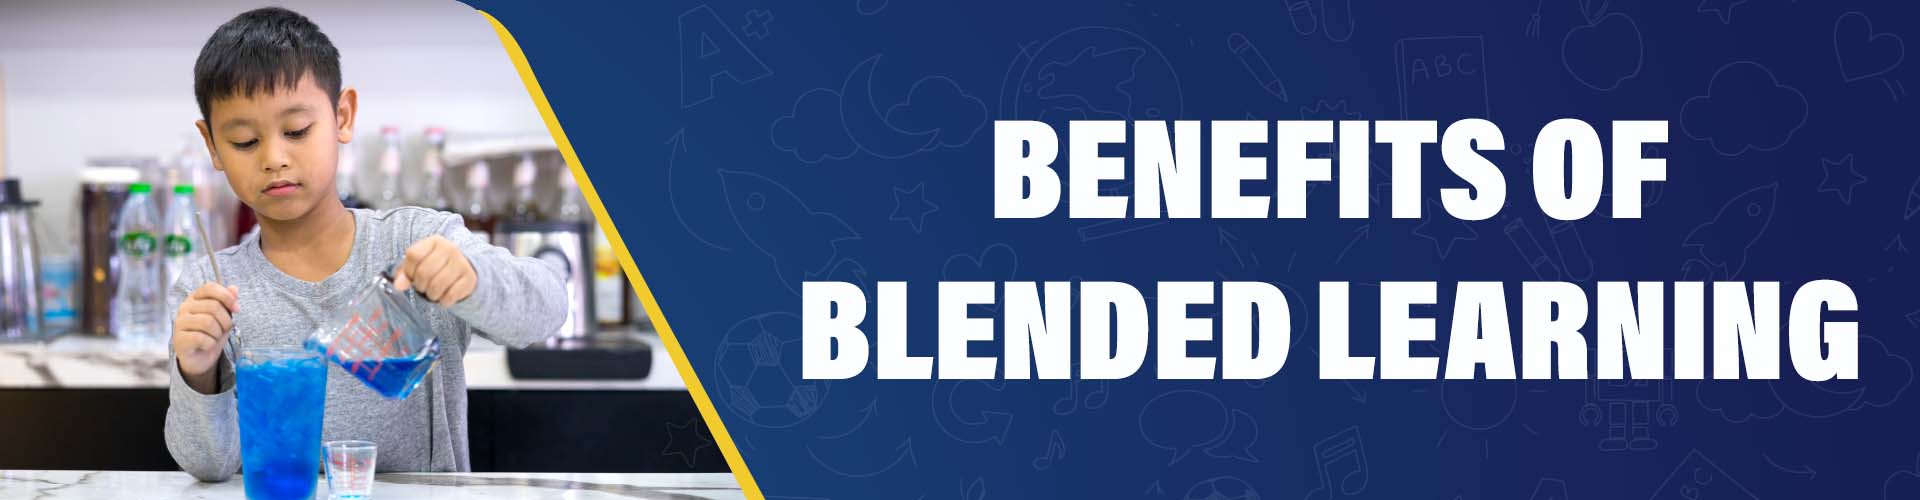 Blended Learning: 5 Big Benefits of It!